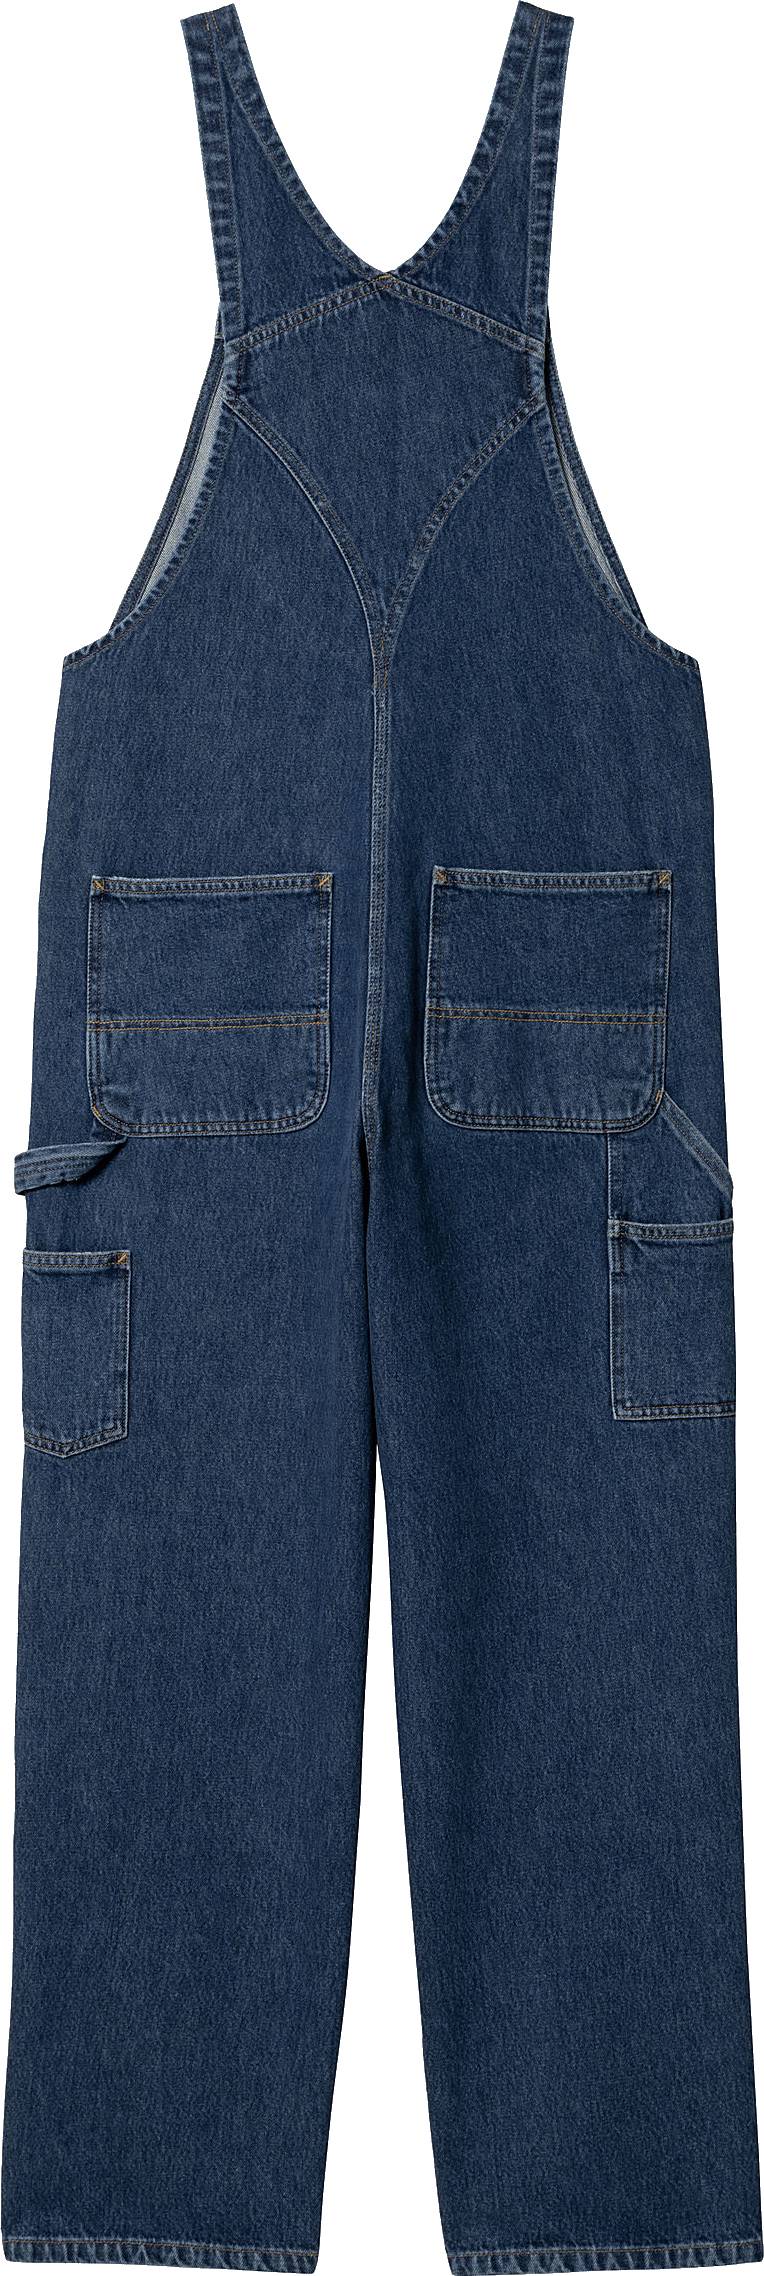 Carhartt WIP DOUBLE KNEE OVERALL SMITH - Salopette - blue rinsed